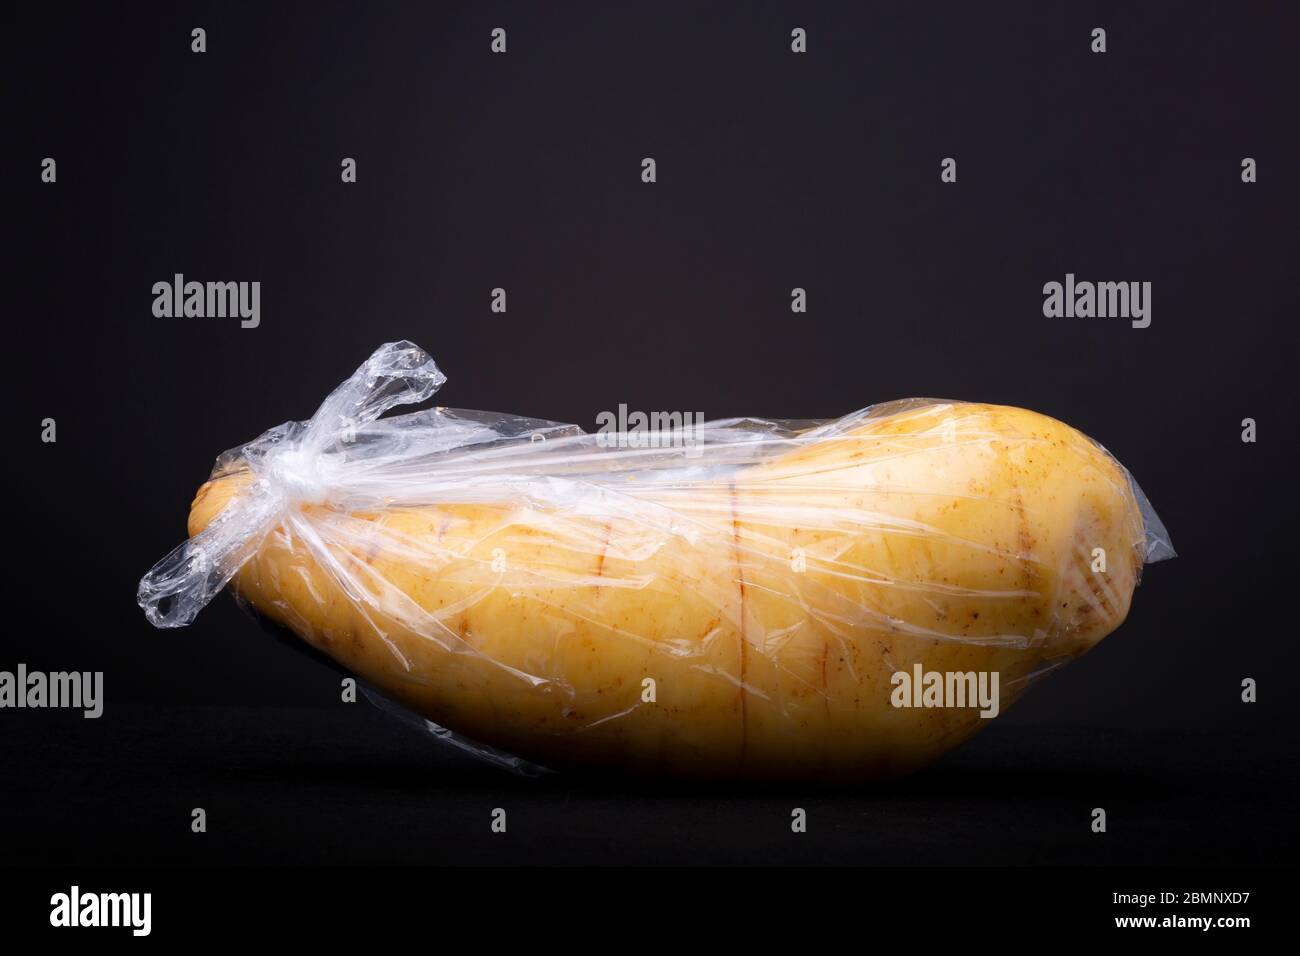 Large plastic packed yellow sweet potato. Studio low key food still life contrasted against a dark background. Stock Photo